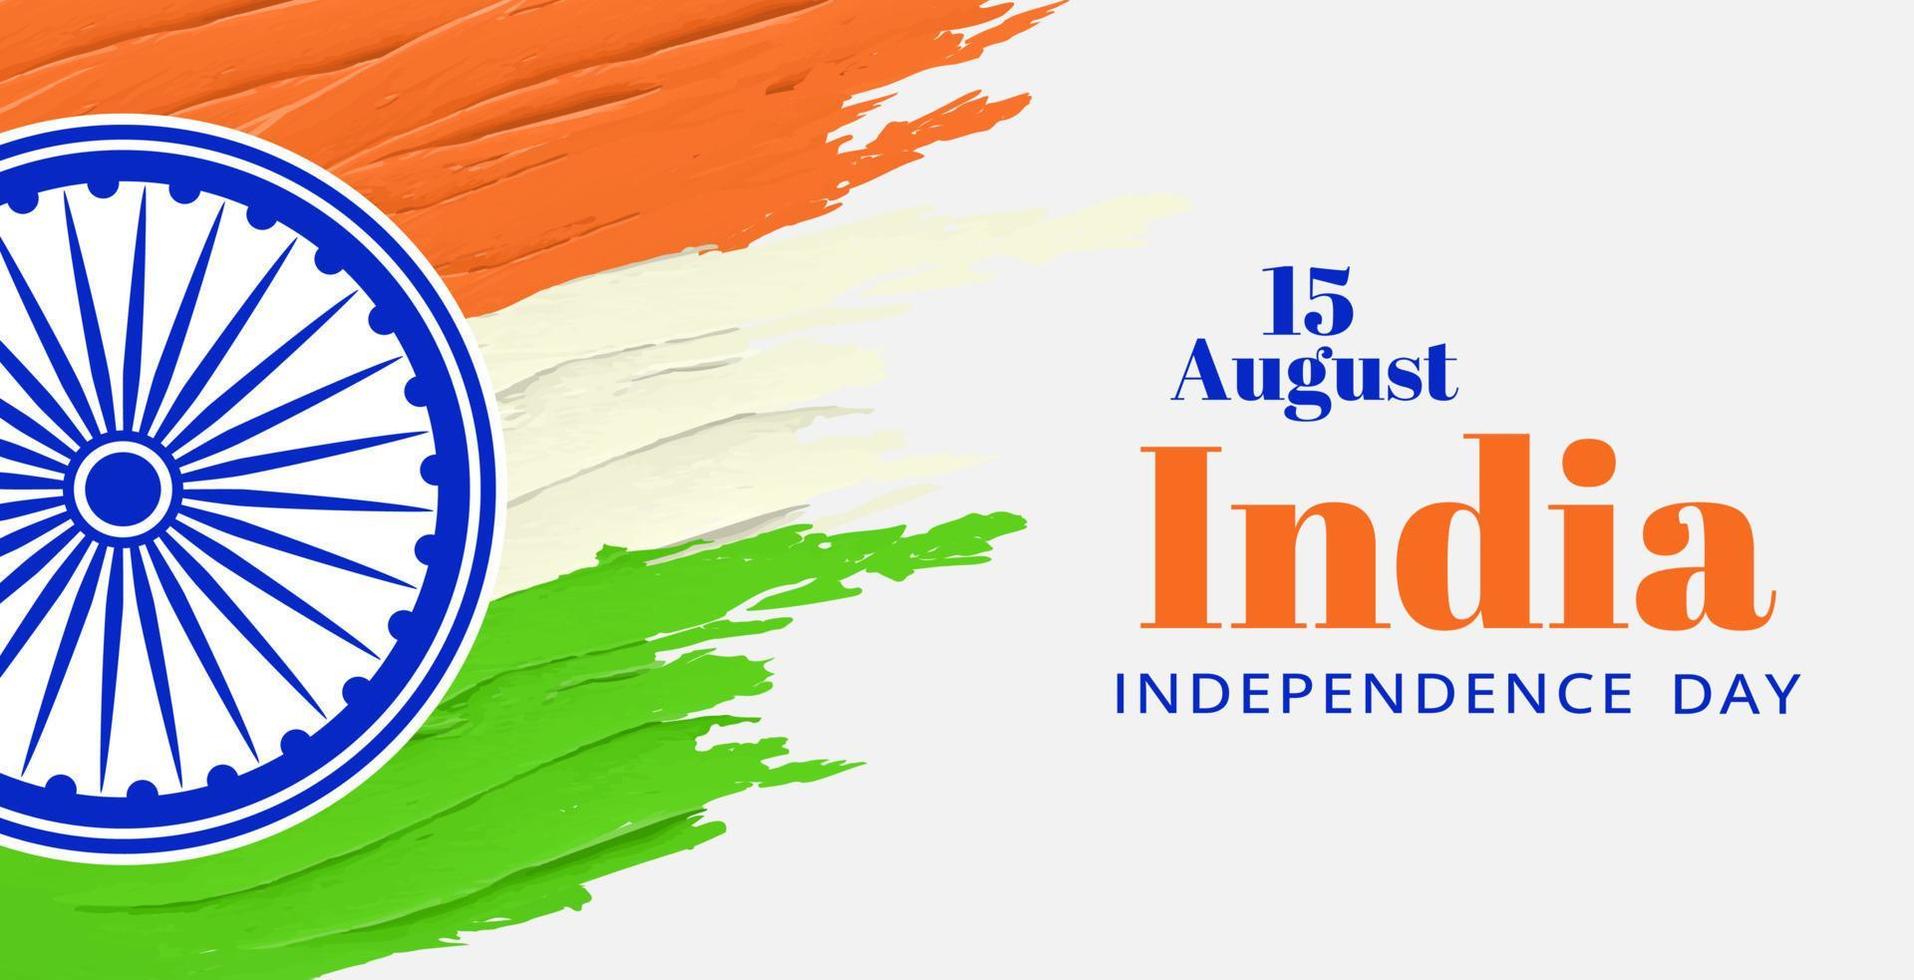 Happy Independence Day of India background. August 15 vector